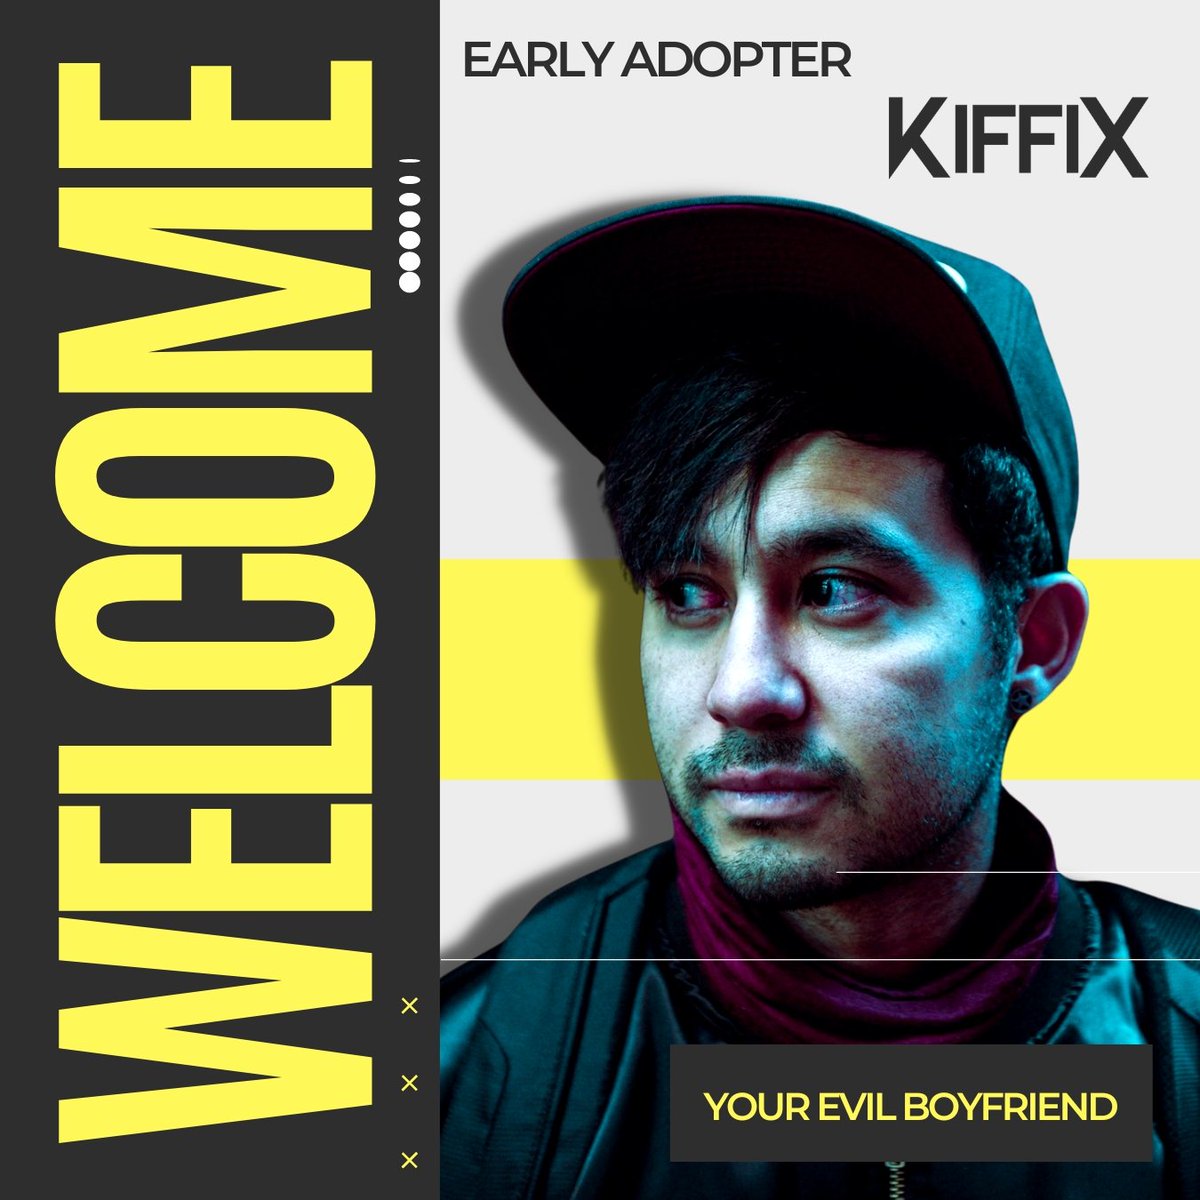 .@kiffixhq would like to welcome @yourevilboyfriendmusic as an Early Adopter to our MVP. 🎧 Check out his KIFFIX Biolink link.kiffix.com/yourevilboyfri…